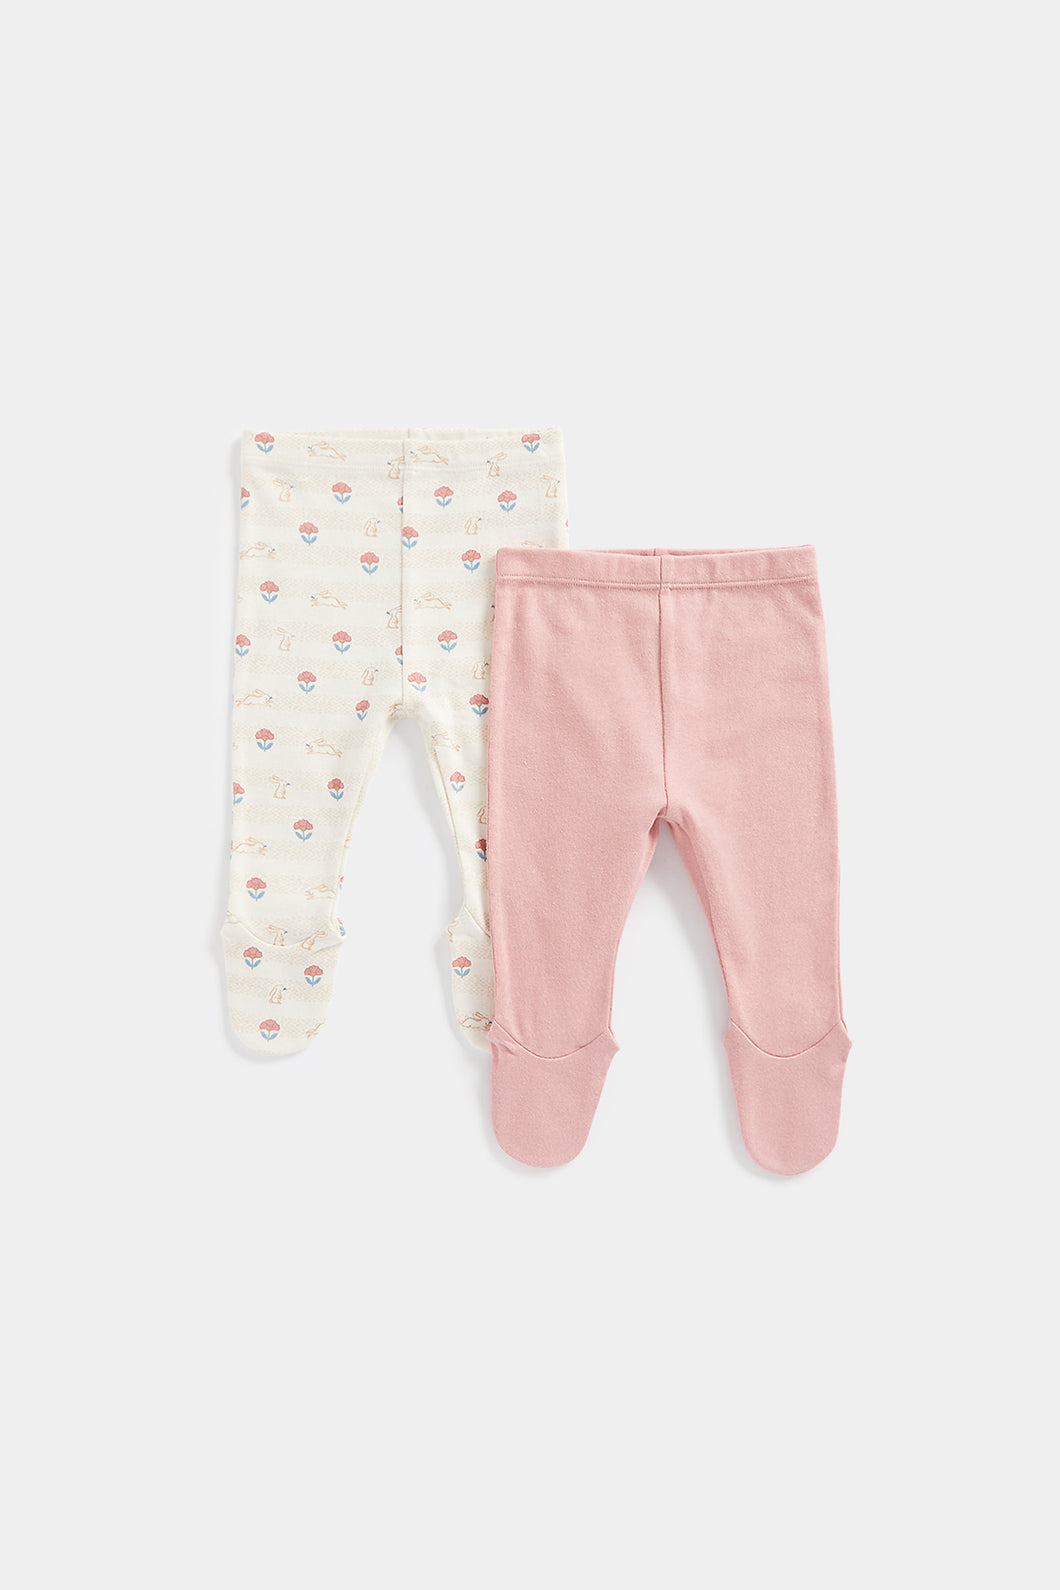 Mothercare Pink and Floral Leggings - 2 Pack